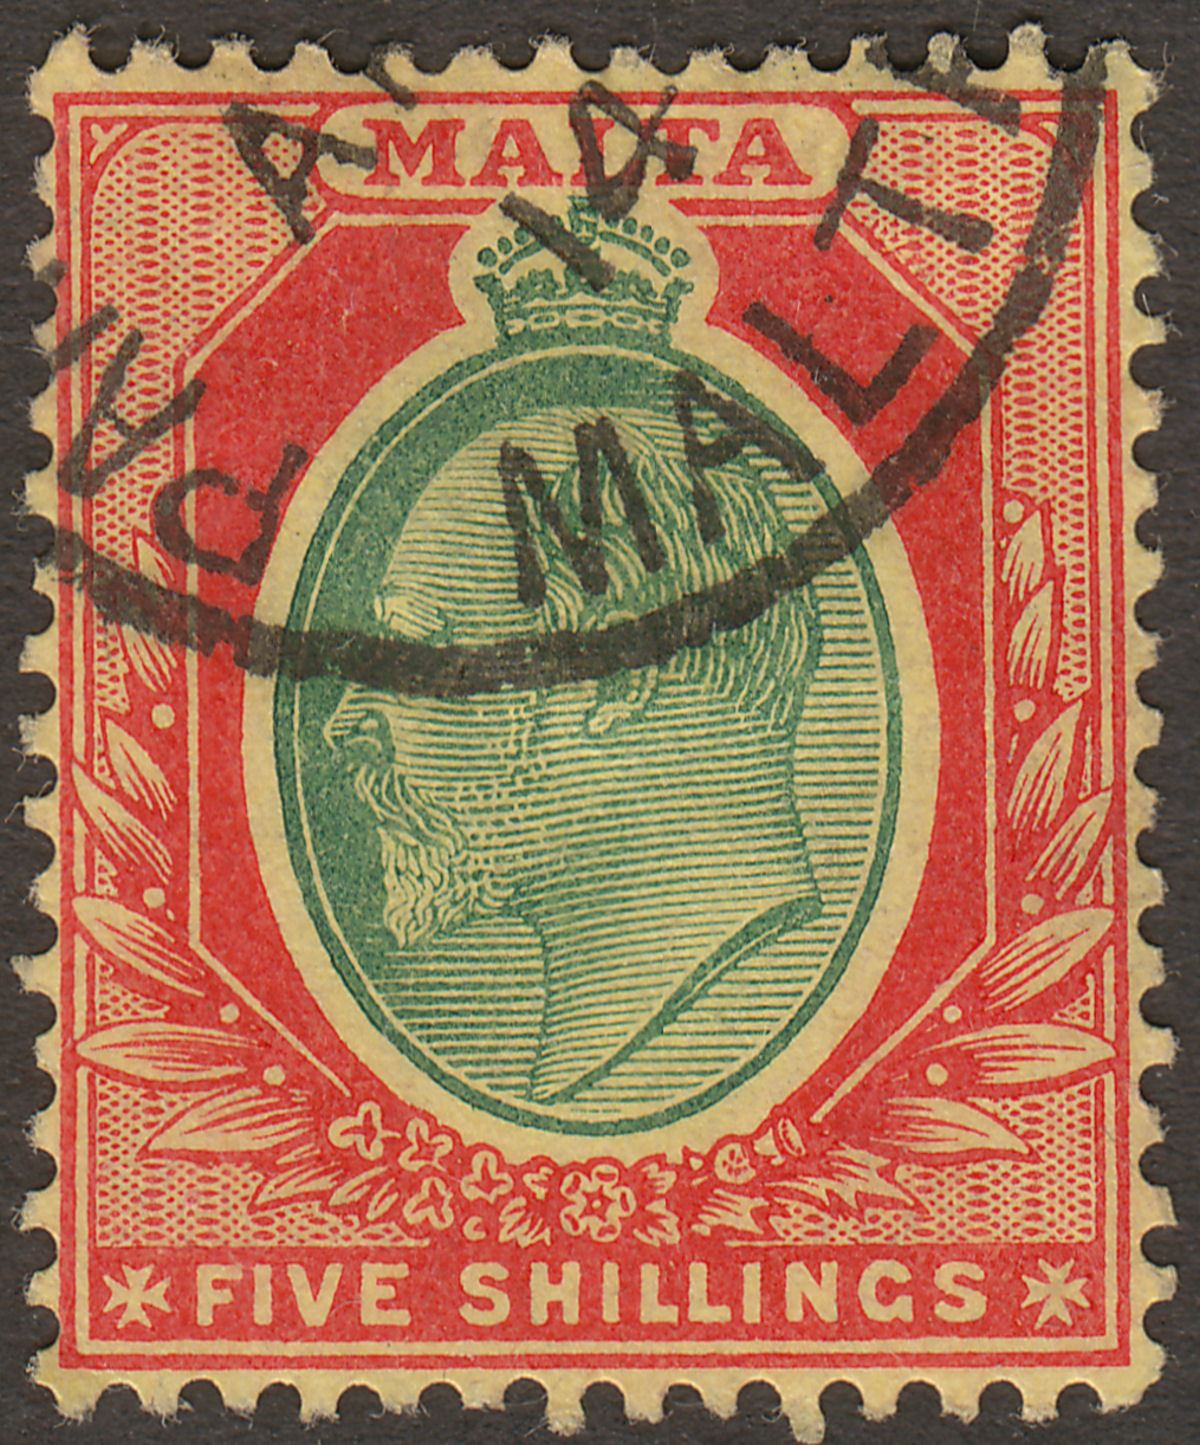 Malta 1911 KEVII 5sh Green and Red on Yellow Used SG63 cat £80